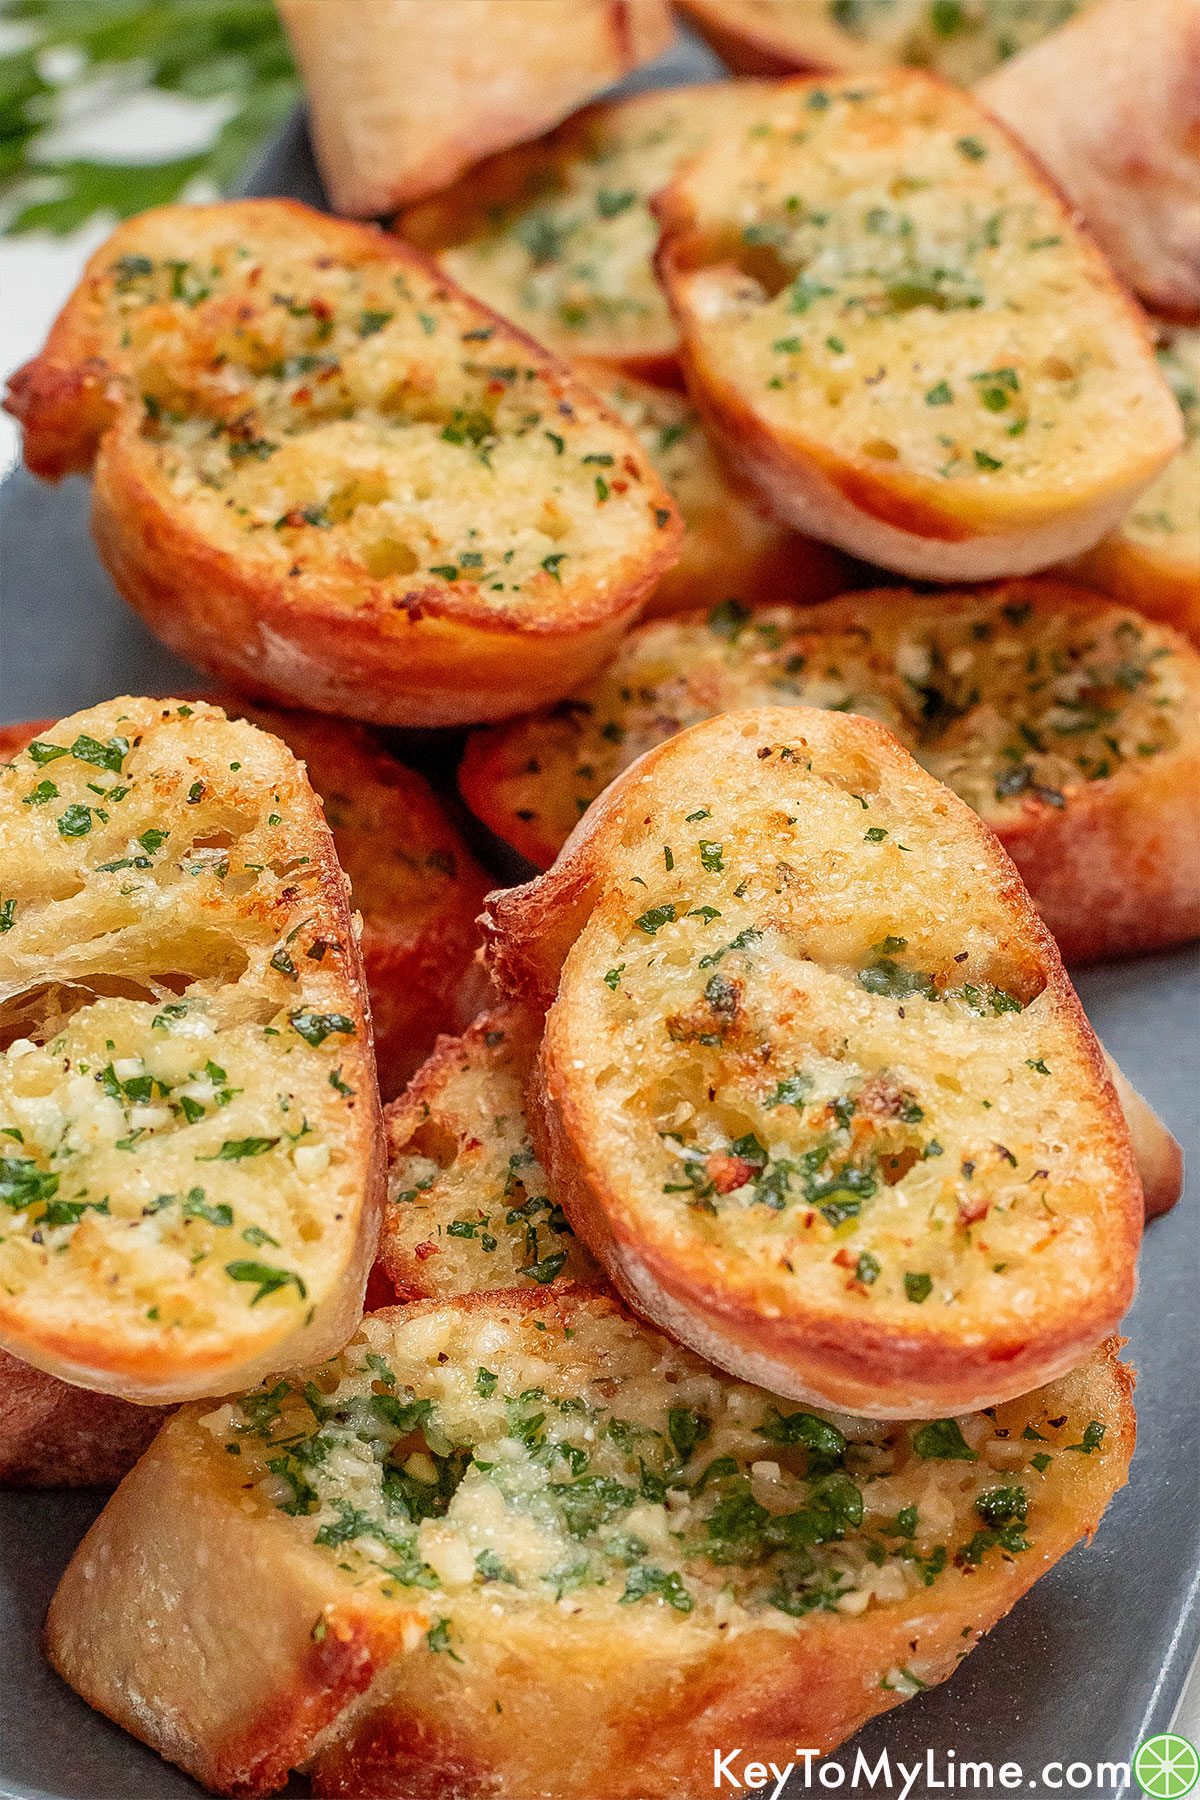 A close up image showing crispy garlic bread glistening with butter and fresh herbs.